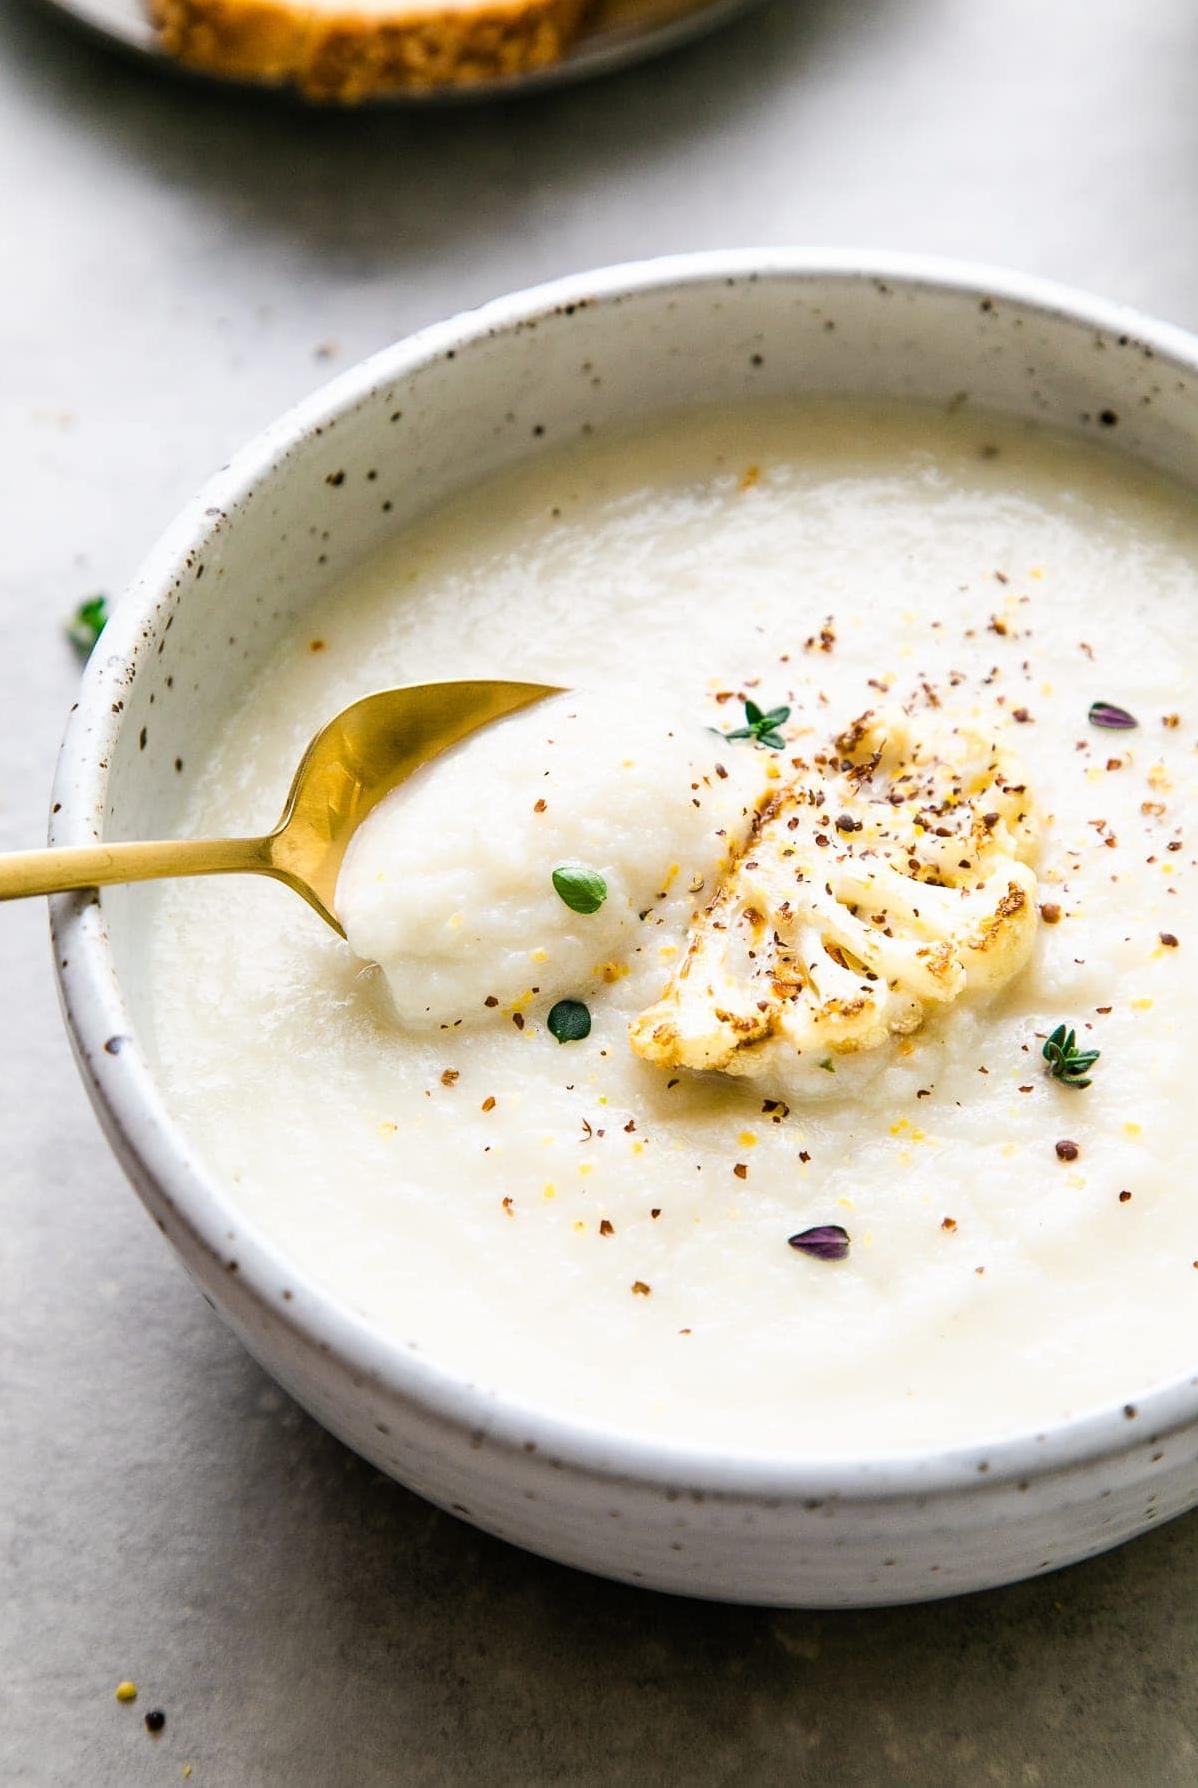  A creamy and comforting vegan Cauliflower Soup that will warm your soul!